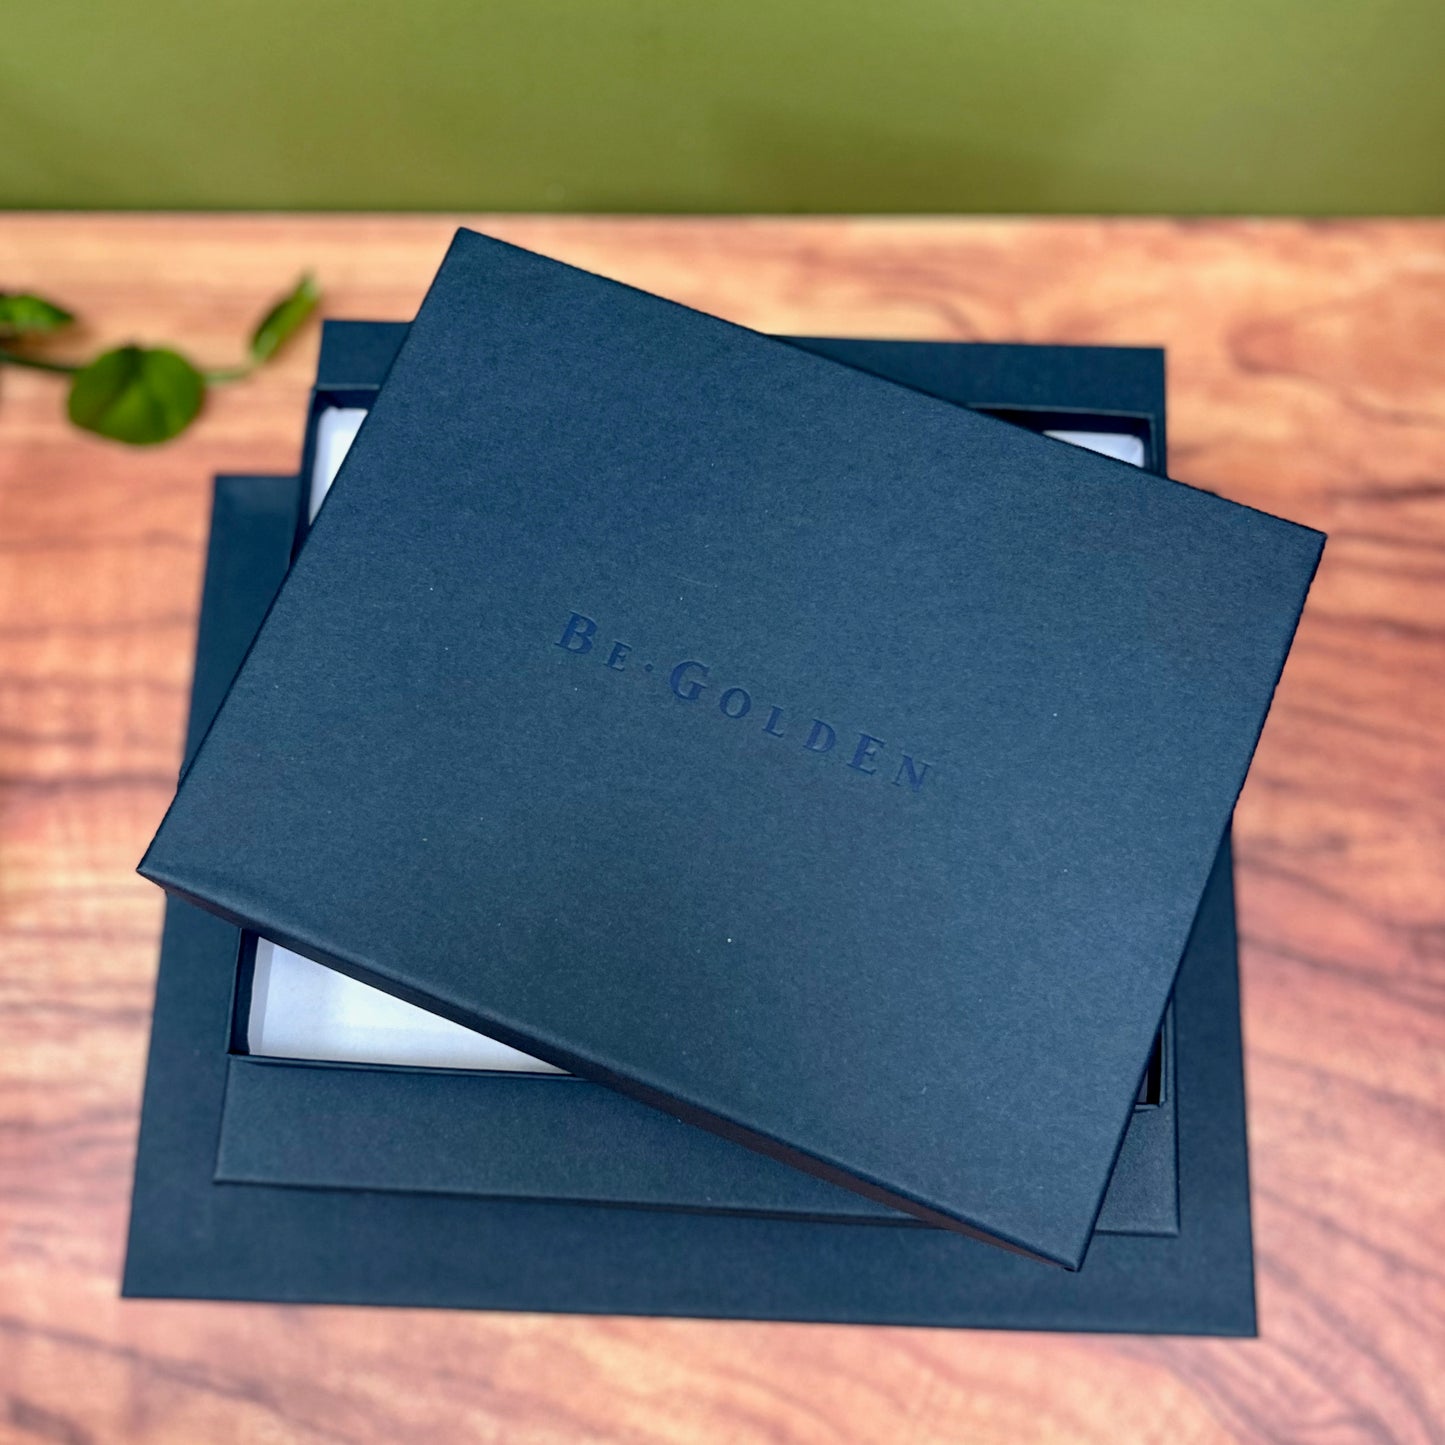 a set of presentation boxes are in a pile - they are navy blue and have the word begolden printed on the front